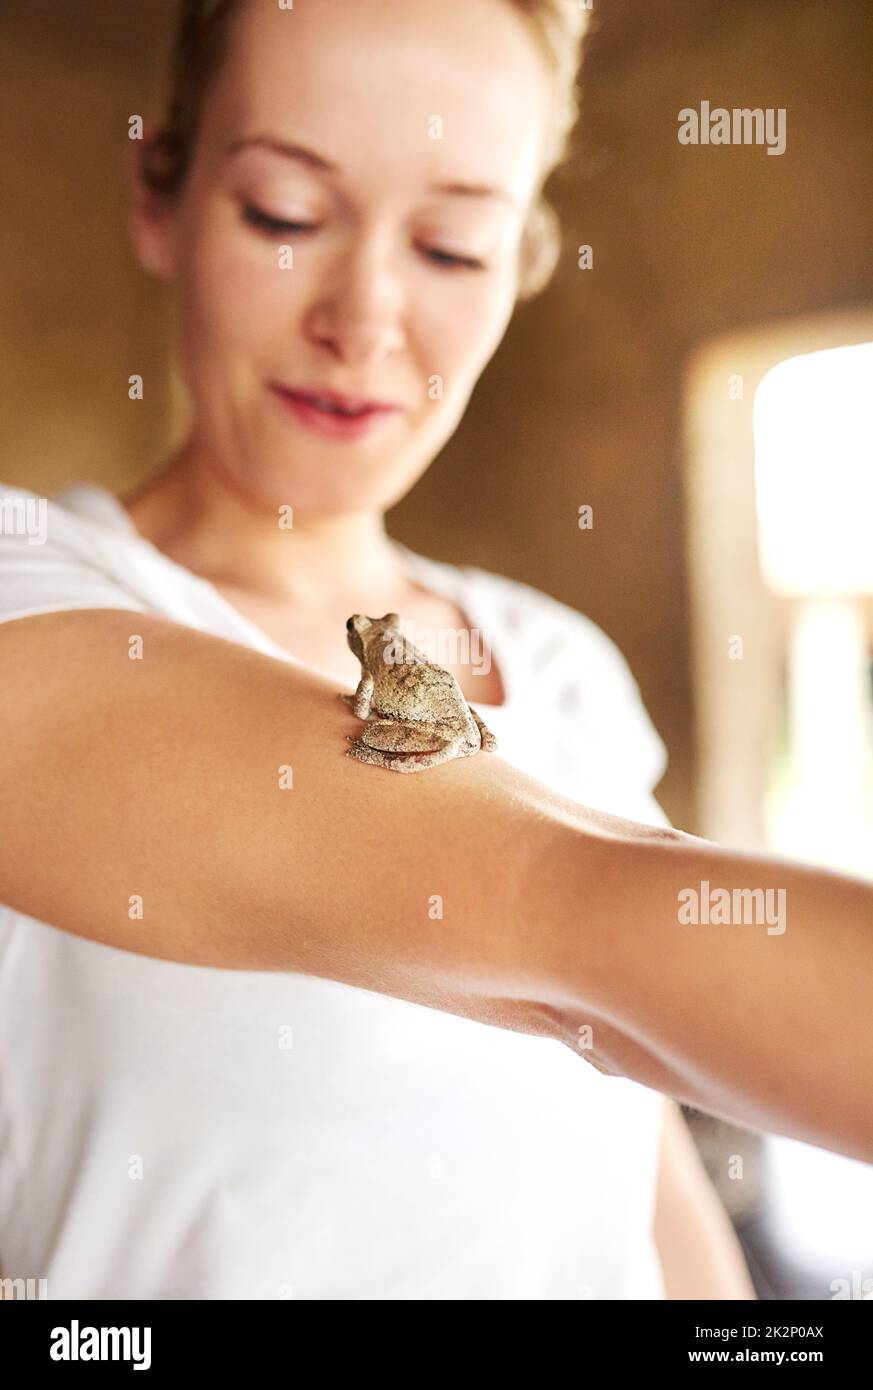 Shot of a tiny frog sitting on a womans arm Stock Photo